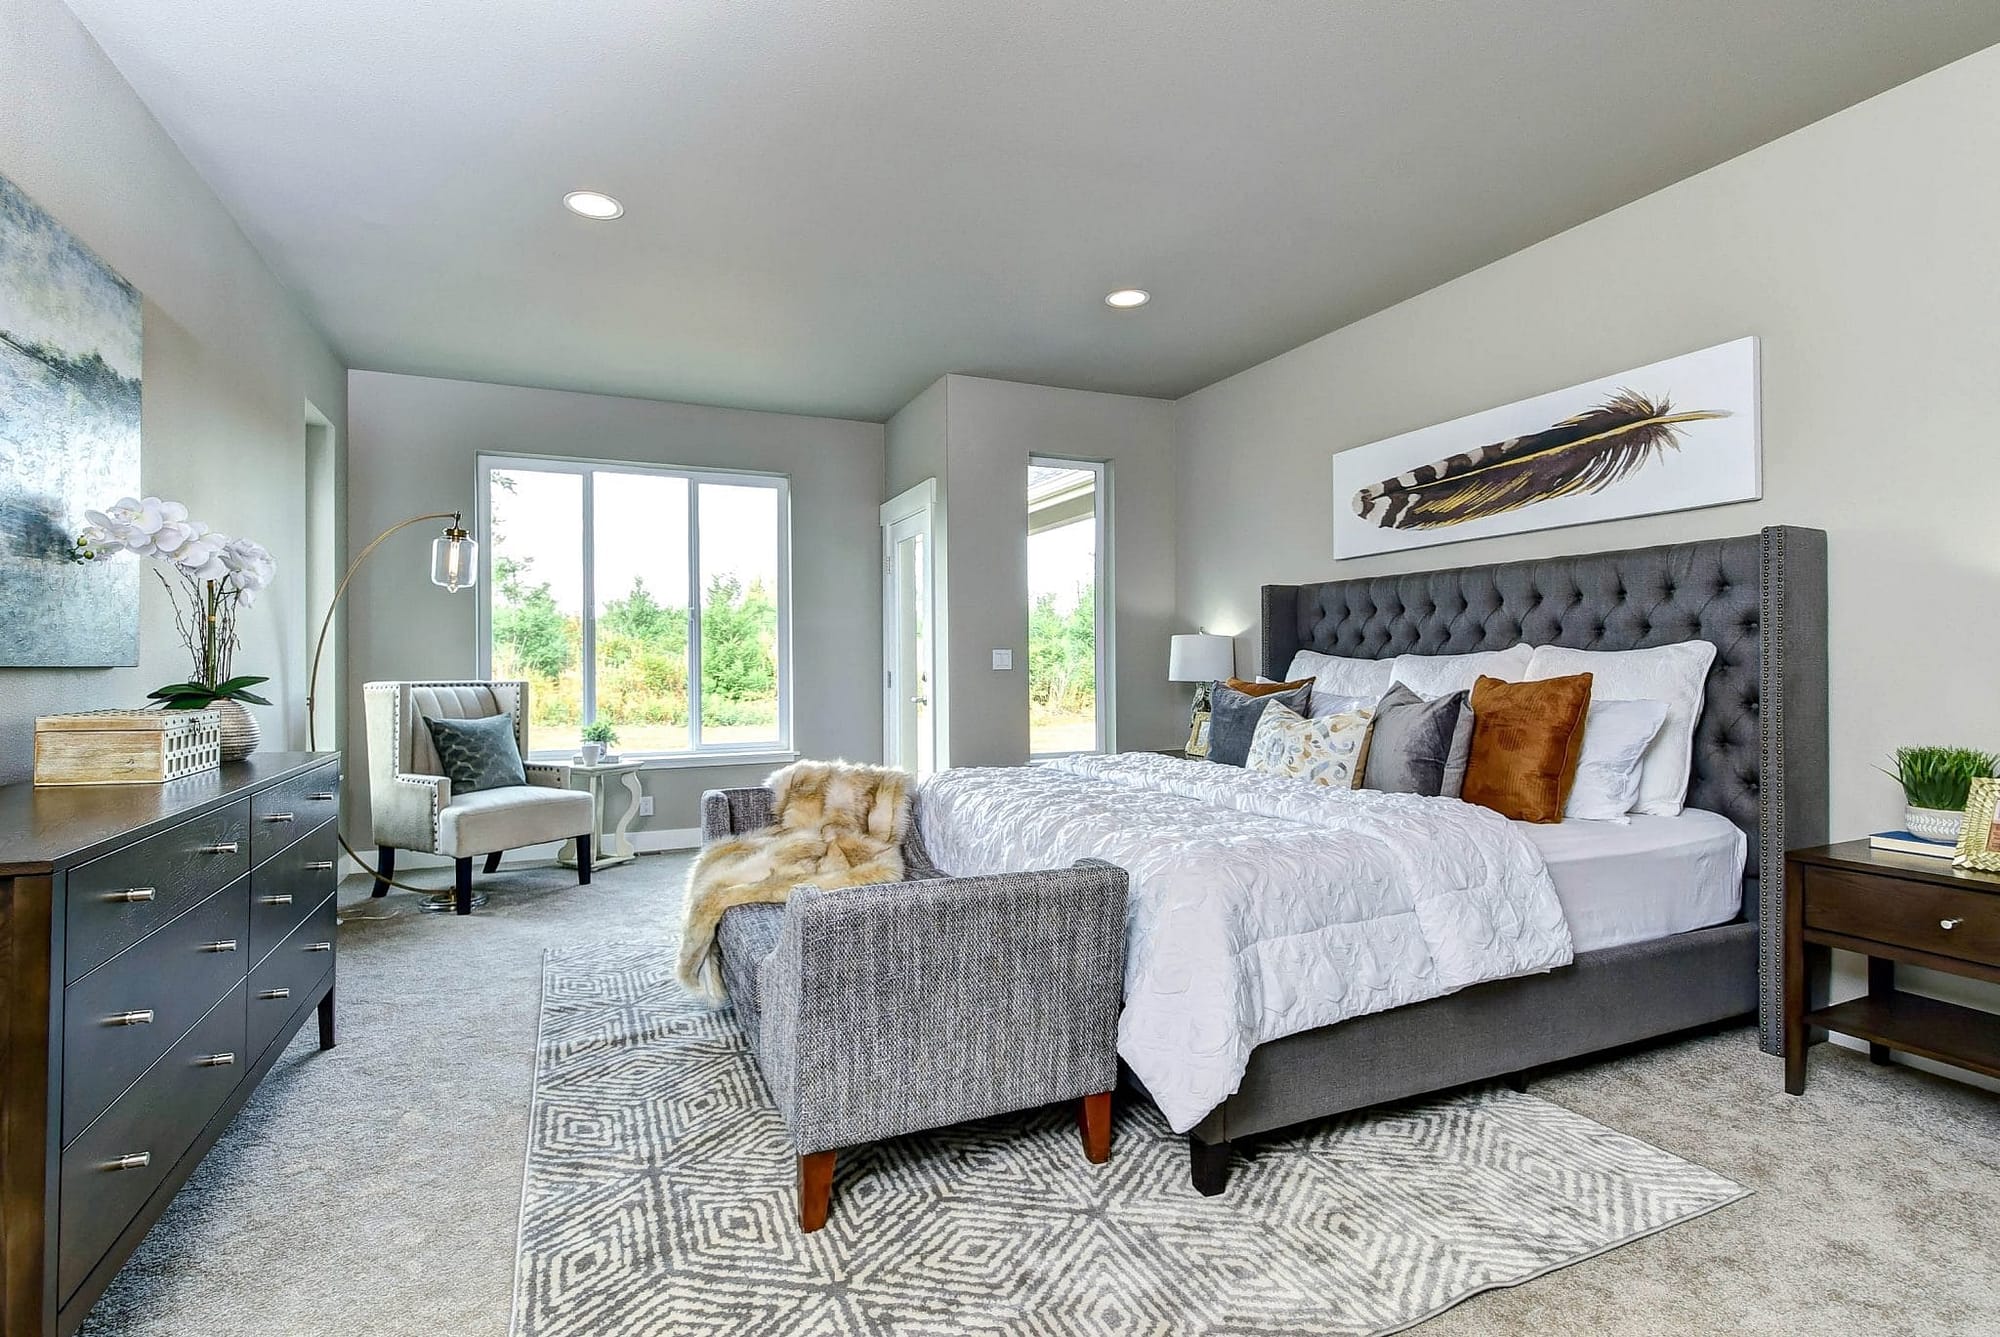 Bedroom staged by Brilliant Staging